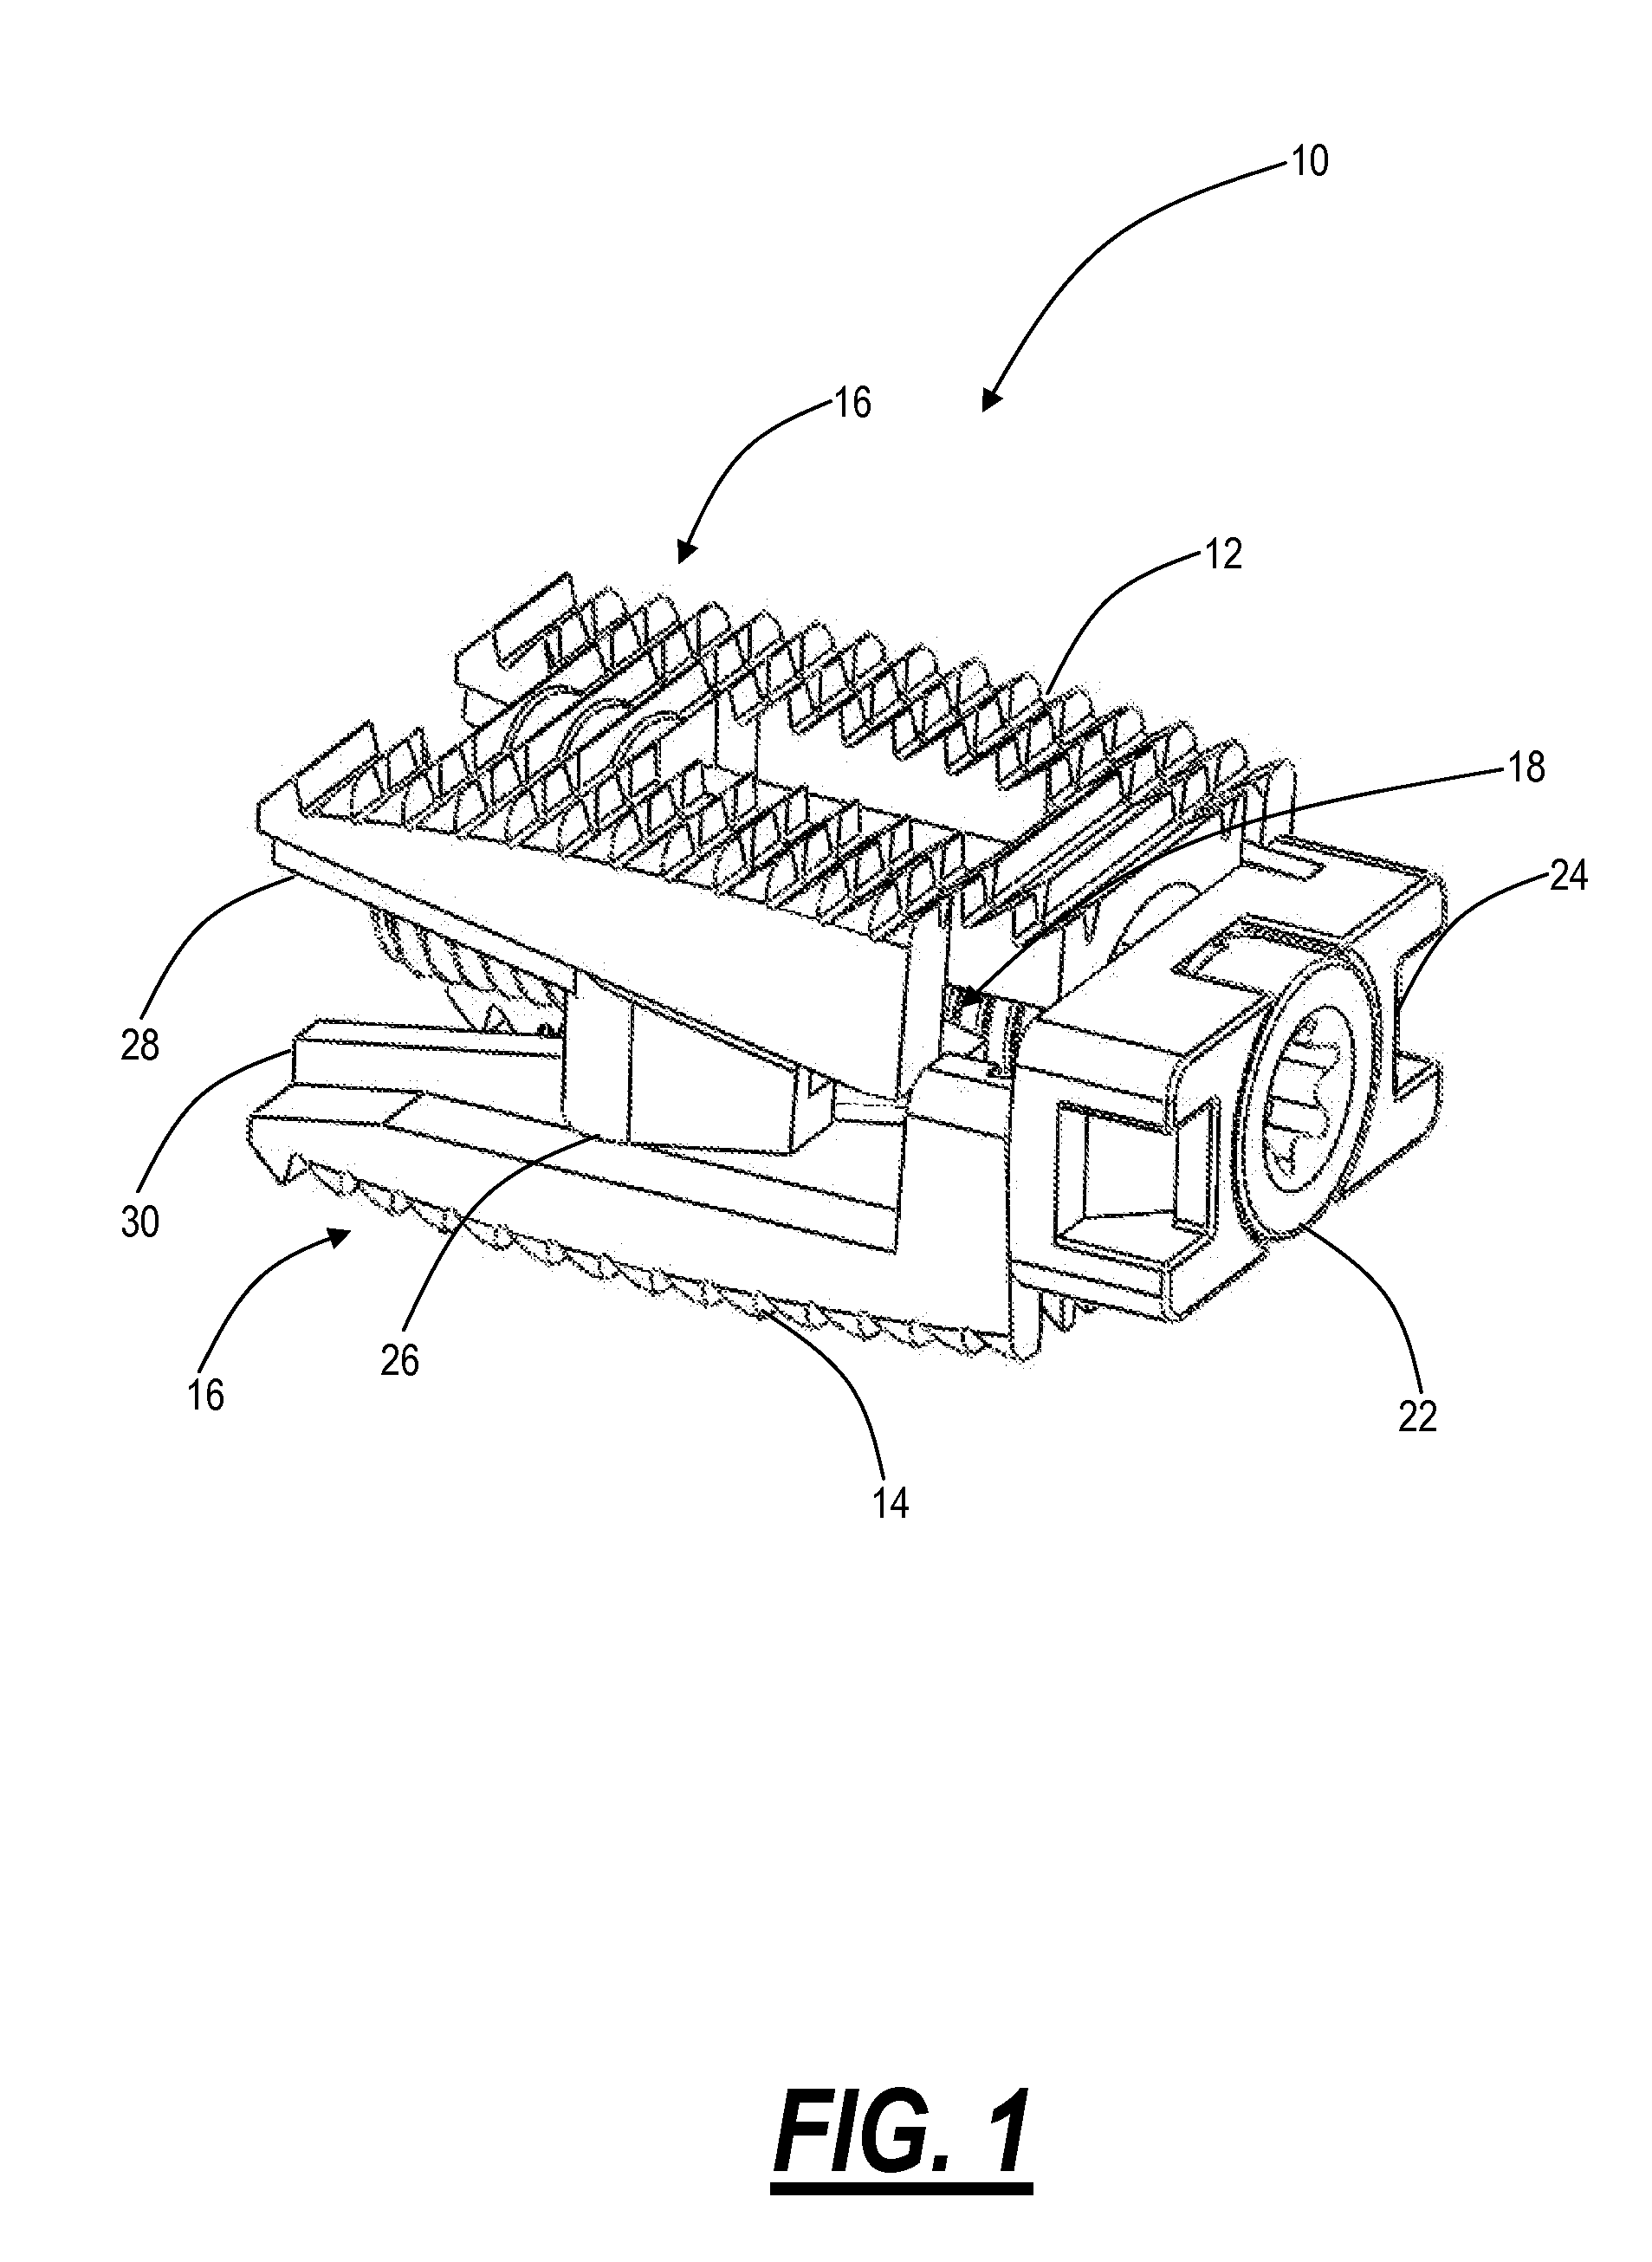 Expandable intervertebral implant and associated surgical method